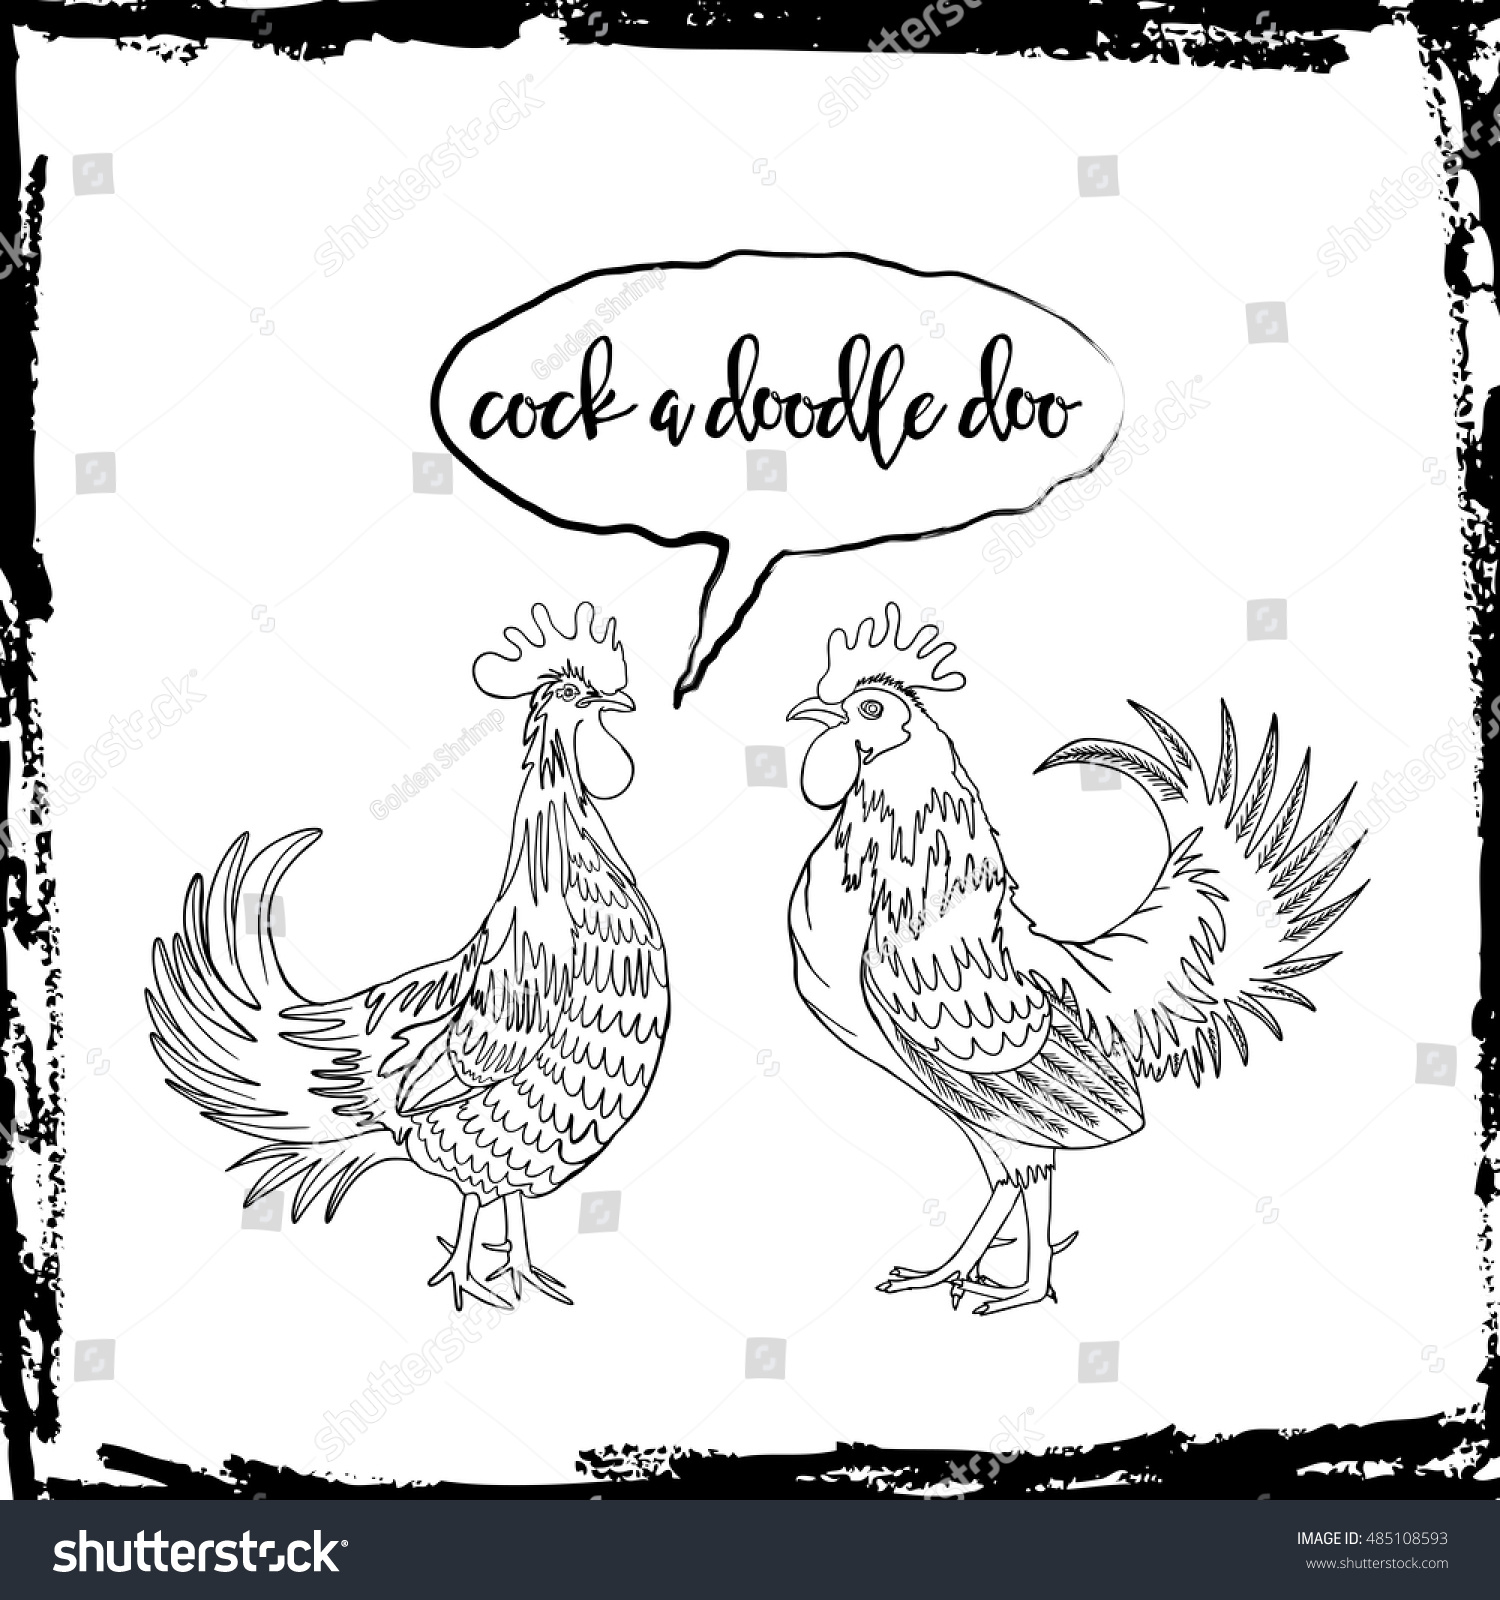 SVG of Cock a doodle doo calligraphy writing in speech bubble. Hipster design with roosters. Hand drawing morning roosters birds on white background. svg